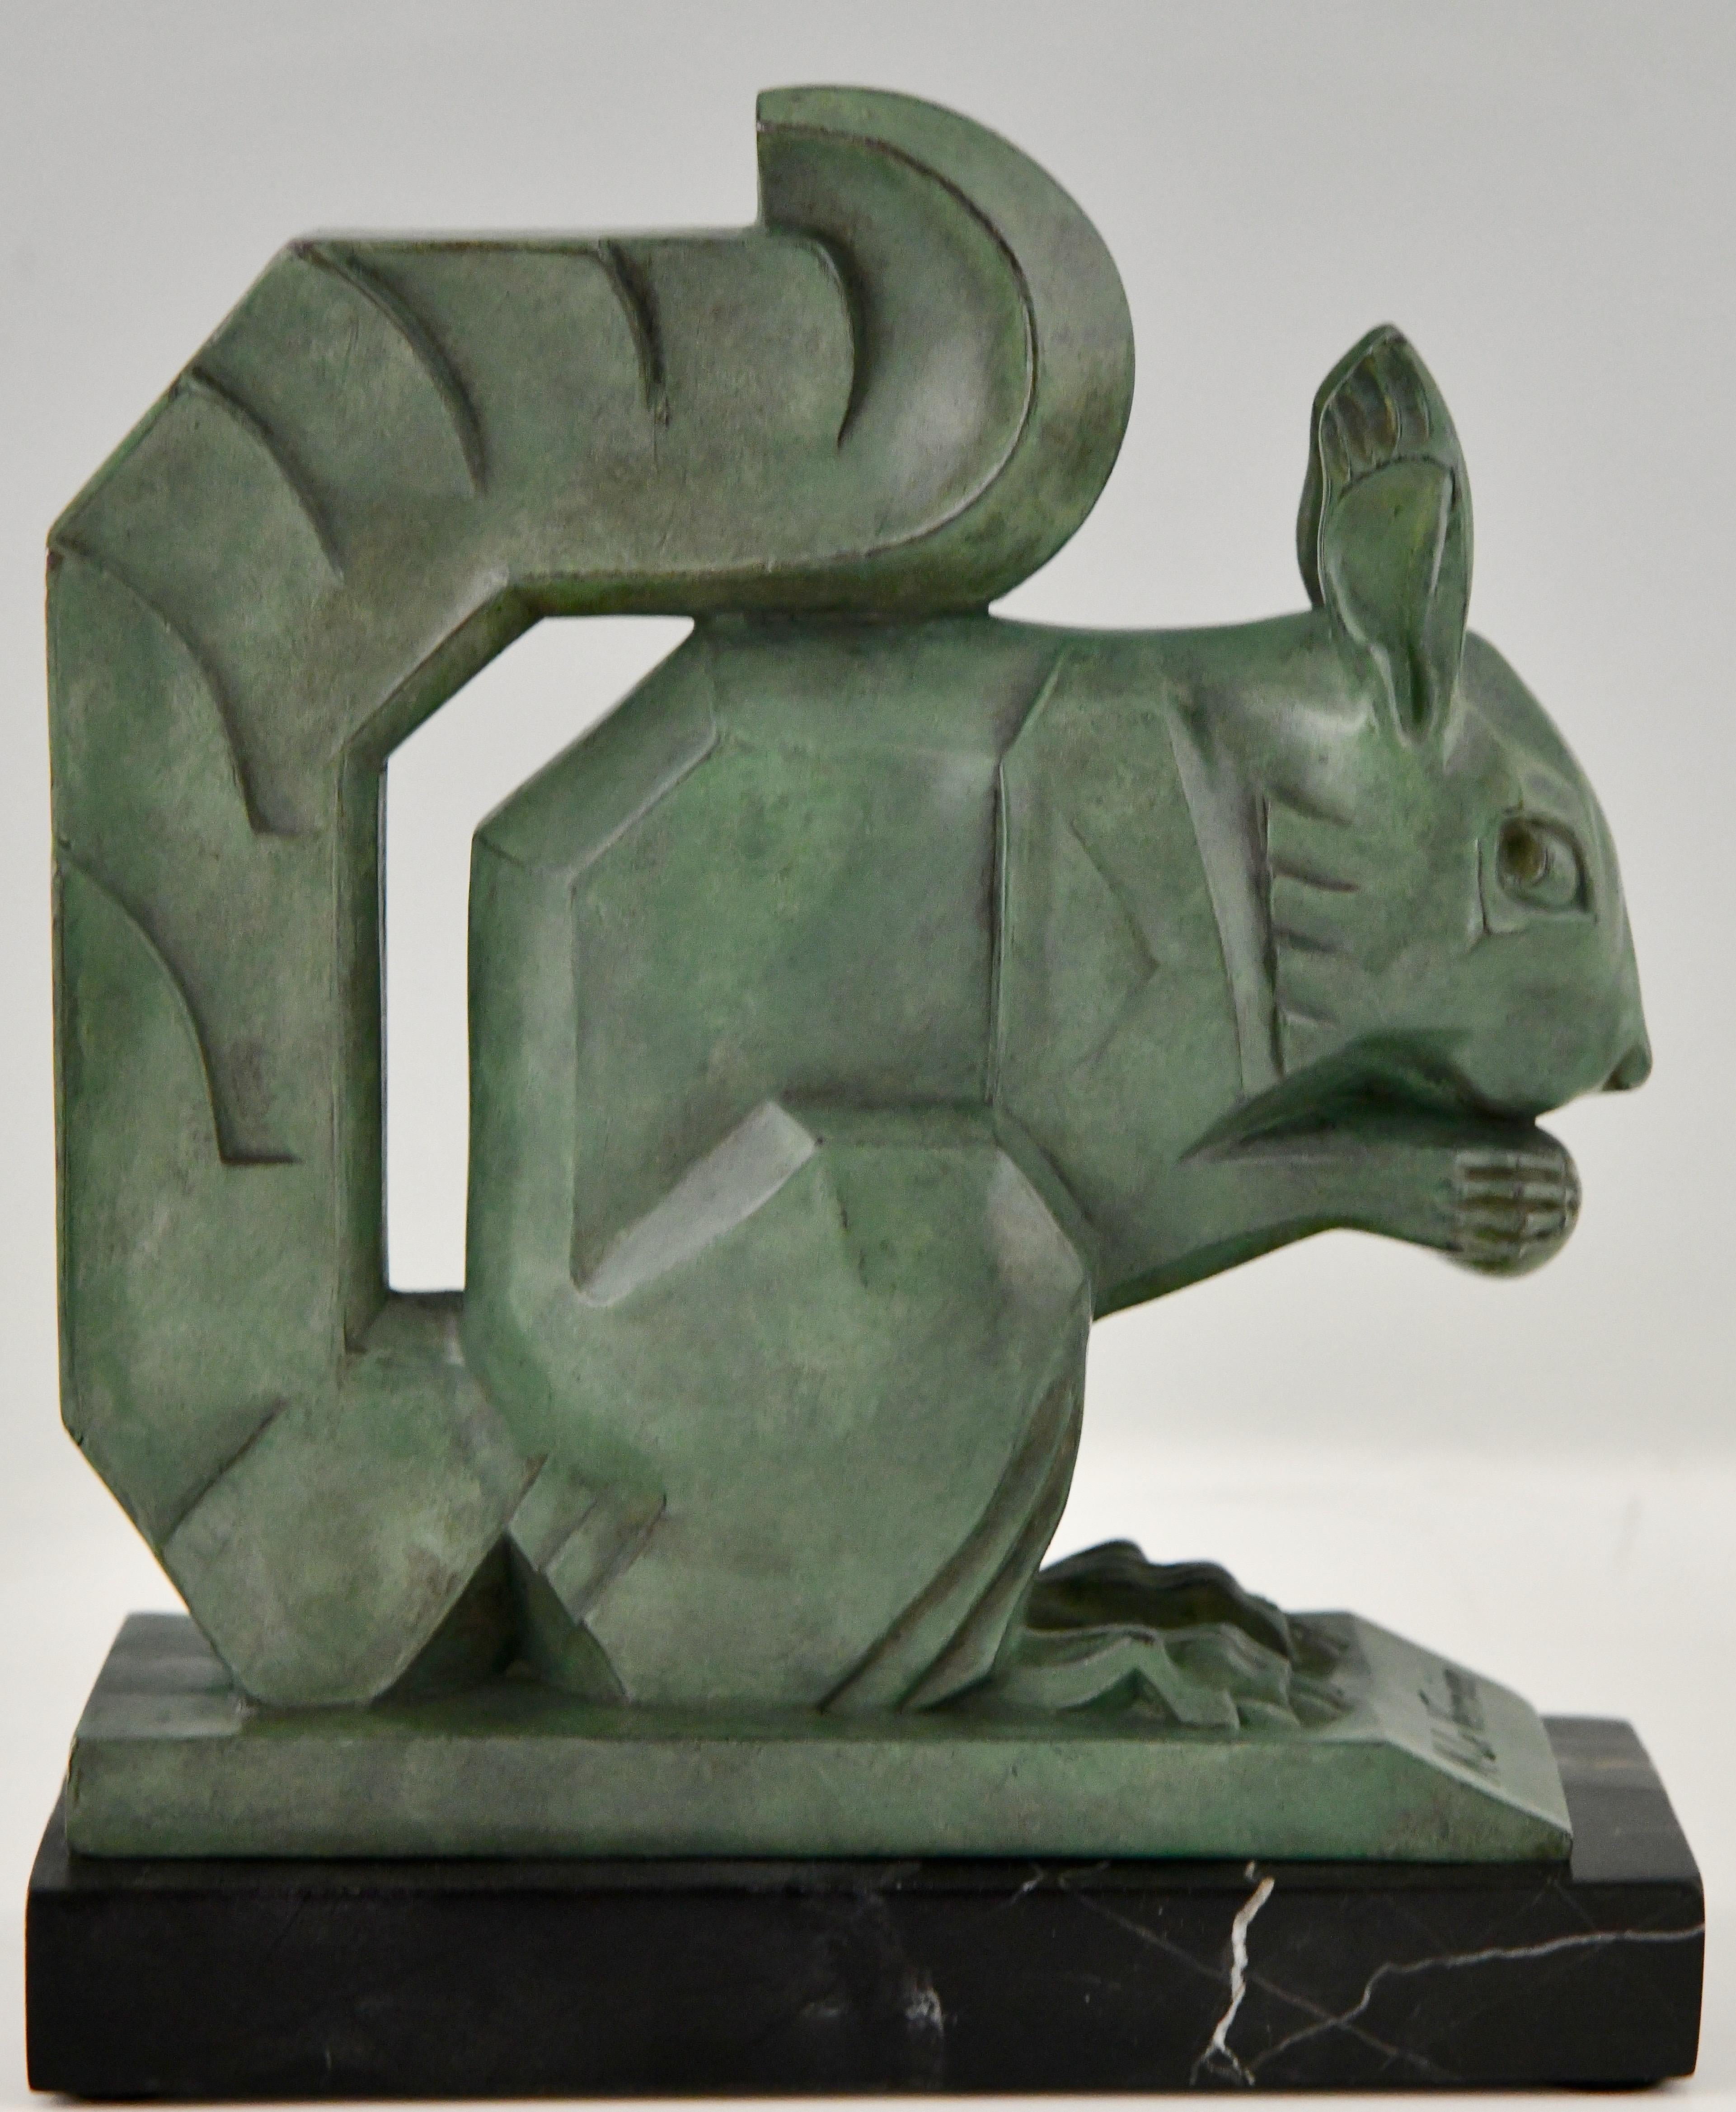 Mid-20th Century Art Deco Squirrel Bookends by Max Le Verrier Largest Size France 1930 Original